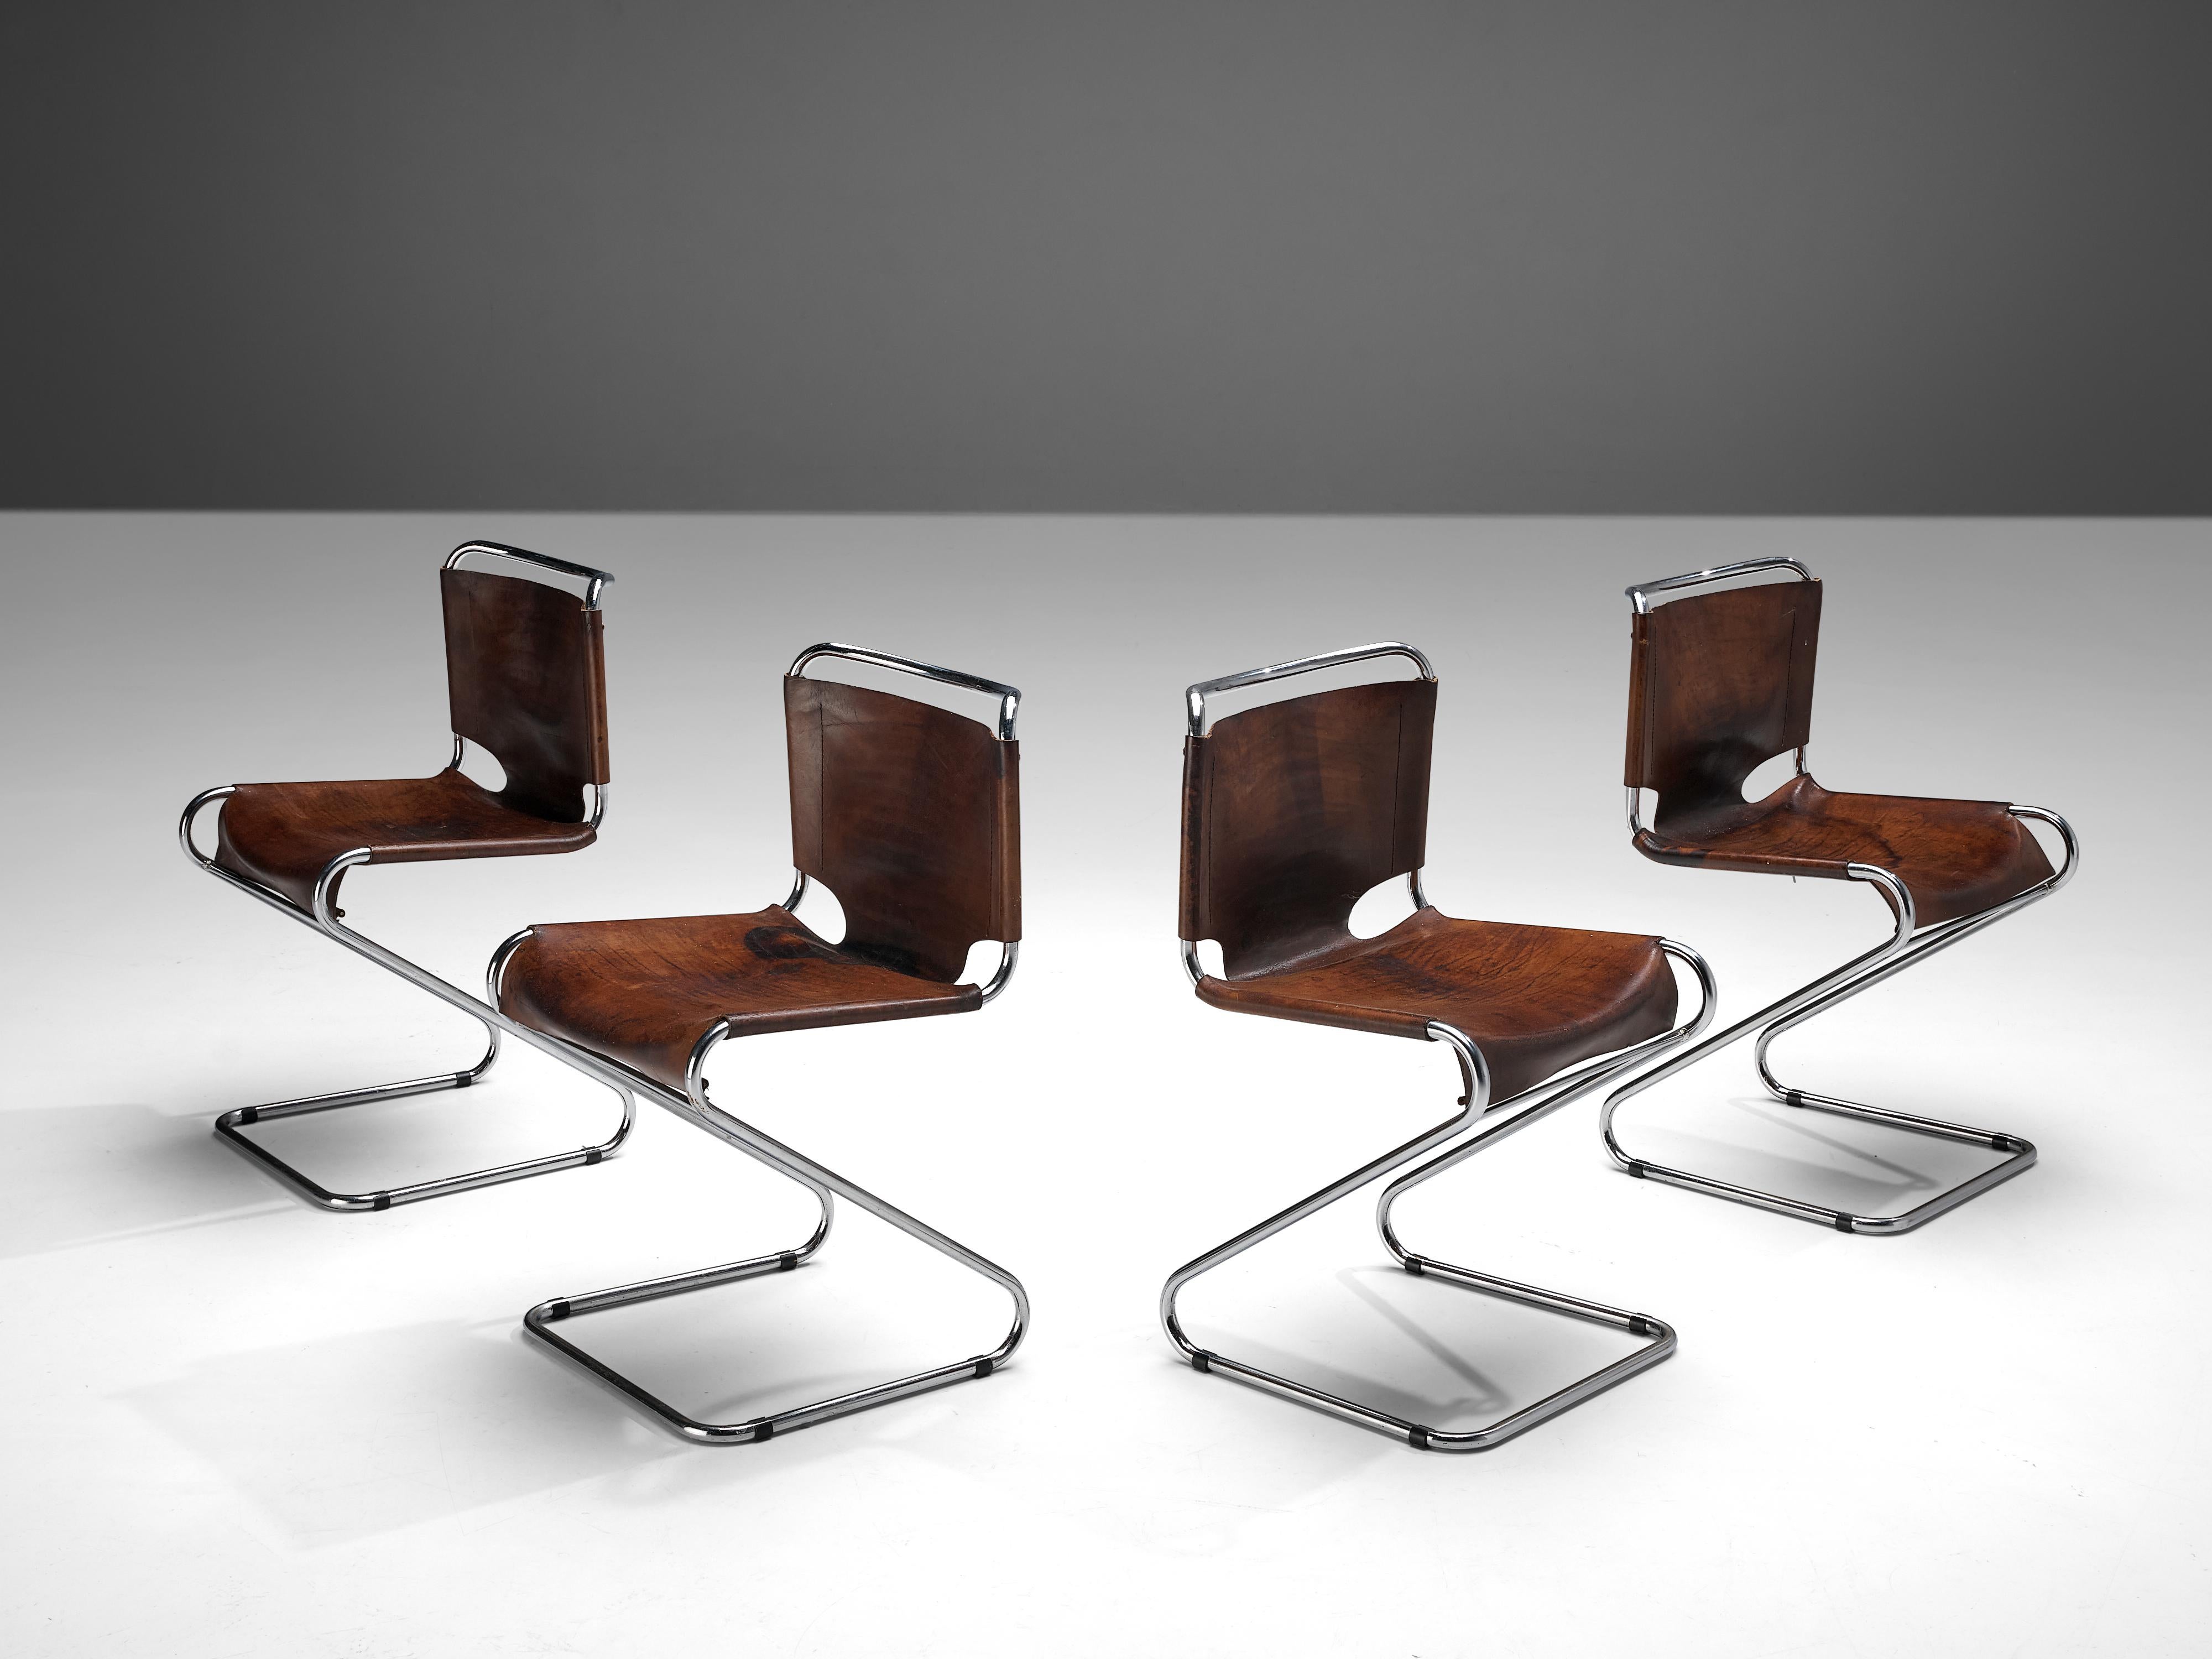 Pascal Mourgue for Steiner, set of four 'Biscia' dining chairs, steel, brown leather, France, 1960s

Set of four tubular steel 'Biscia' cantilever chairs in brown, patinated leather by Pascal Mourgue. These chairs have a very dynamic appearance